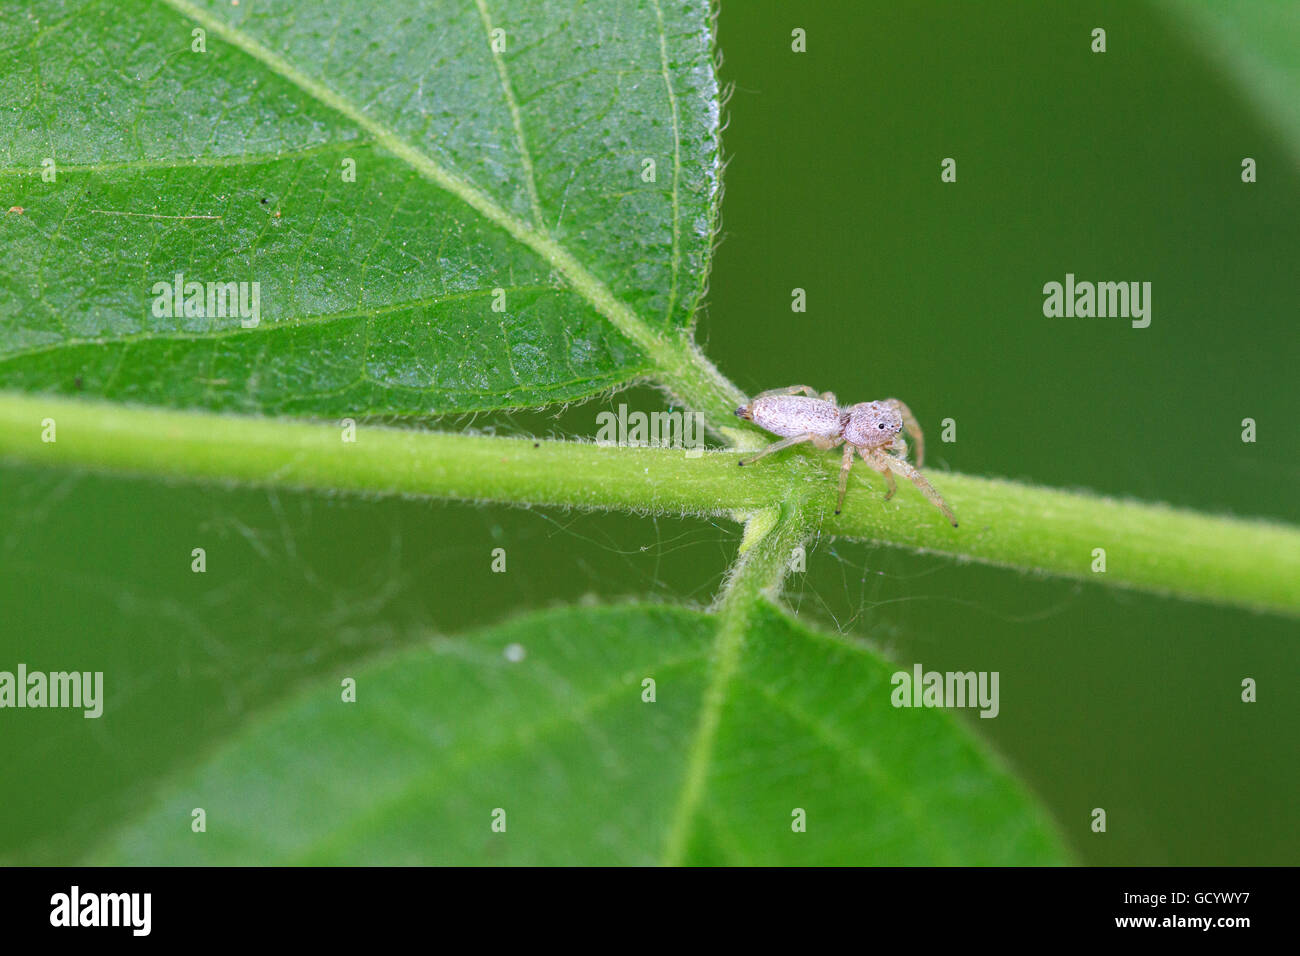 Small, white jumping spider (Hentzia sp.) on plant stem. Stock Photo